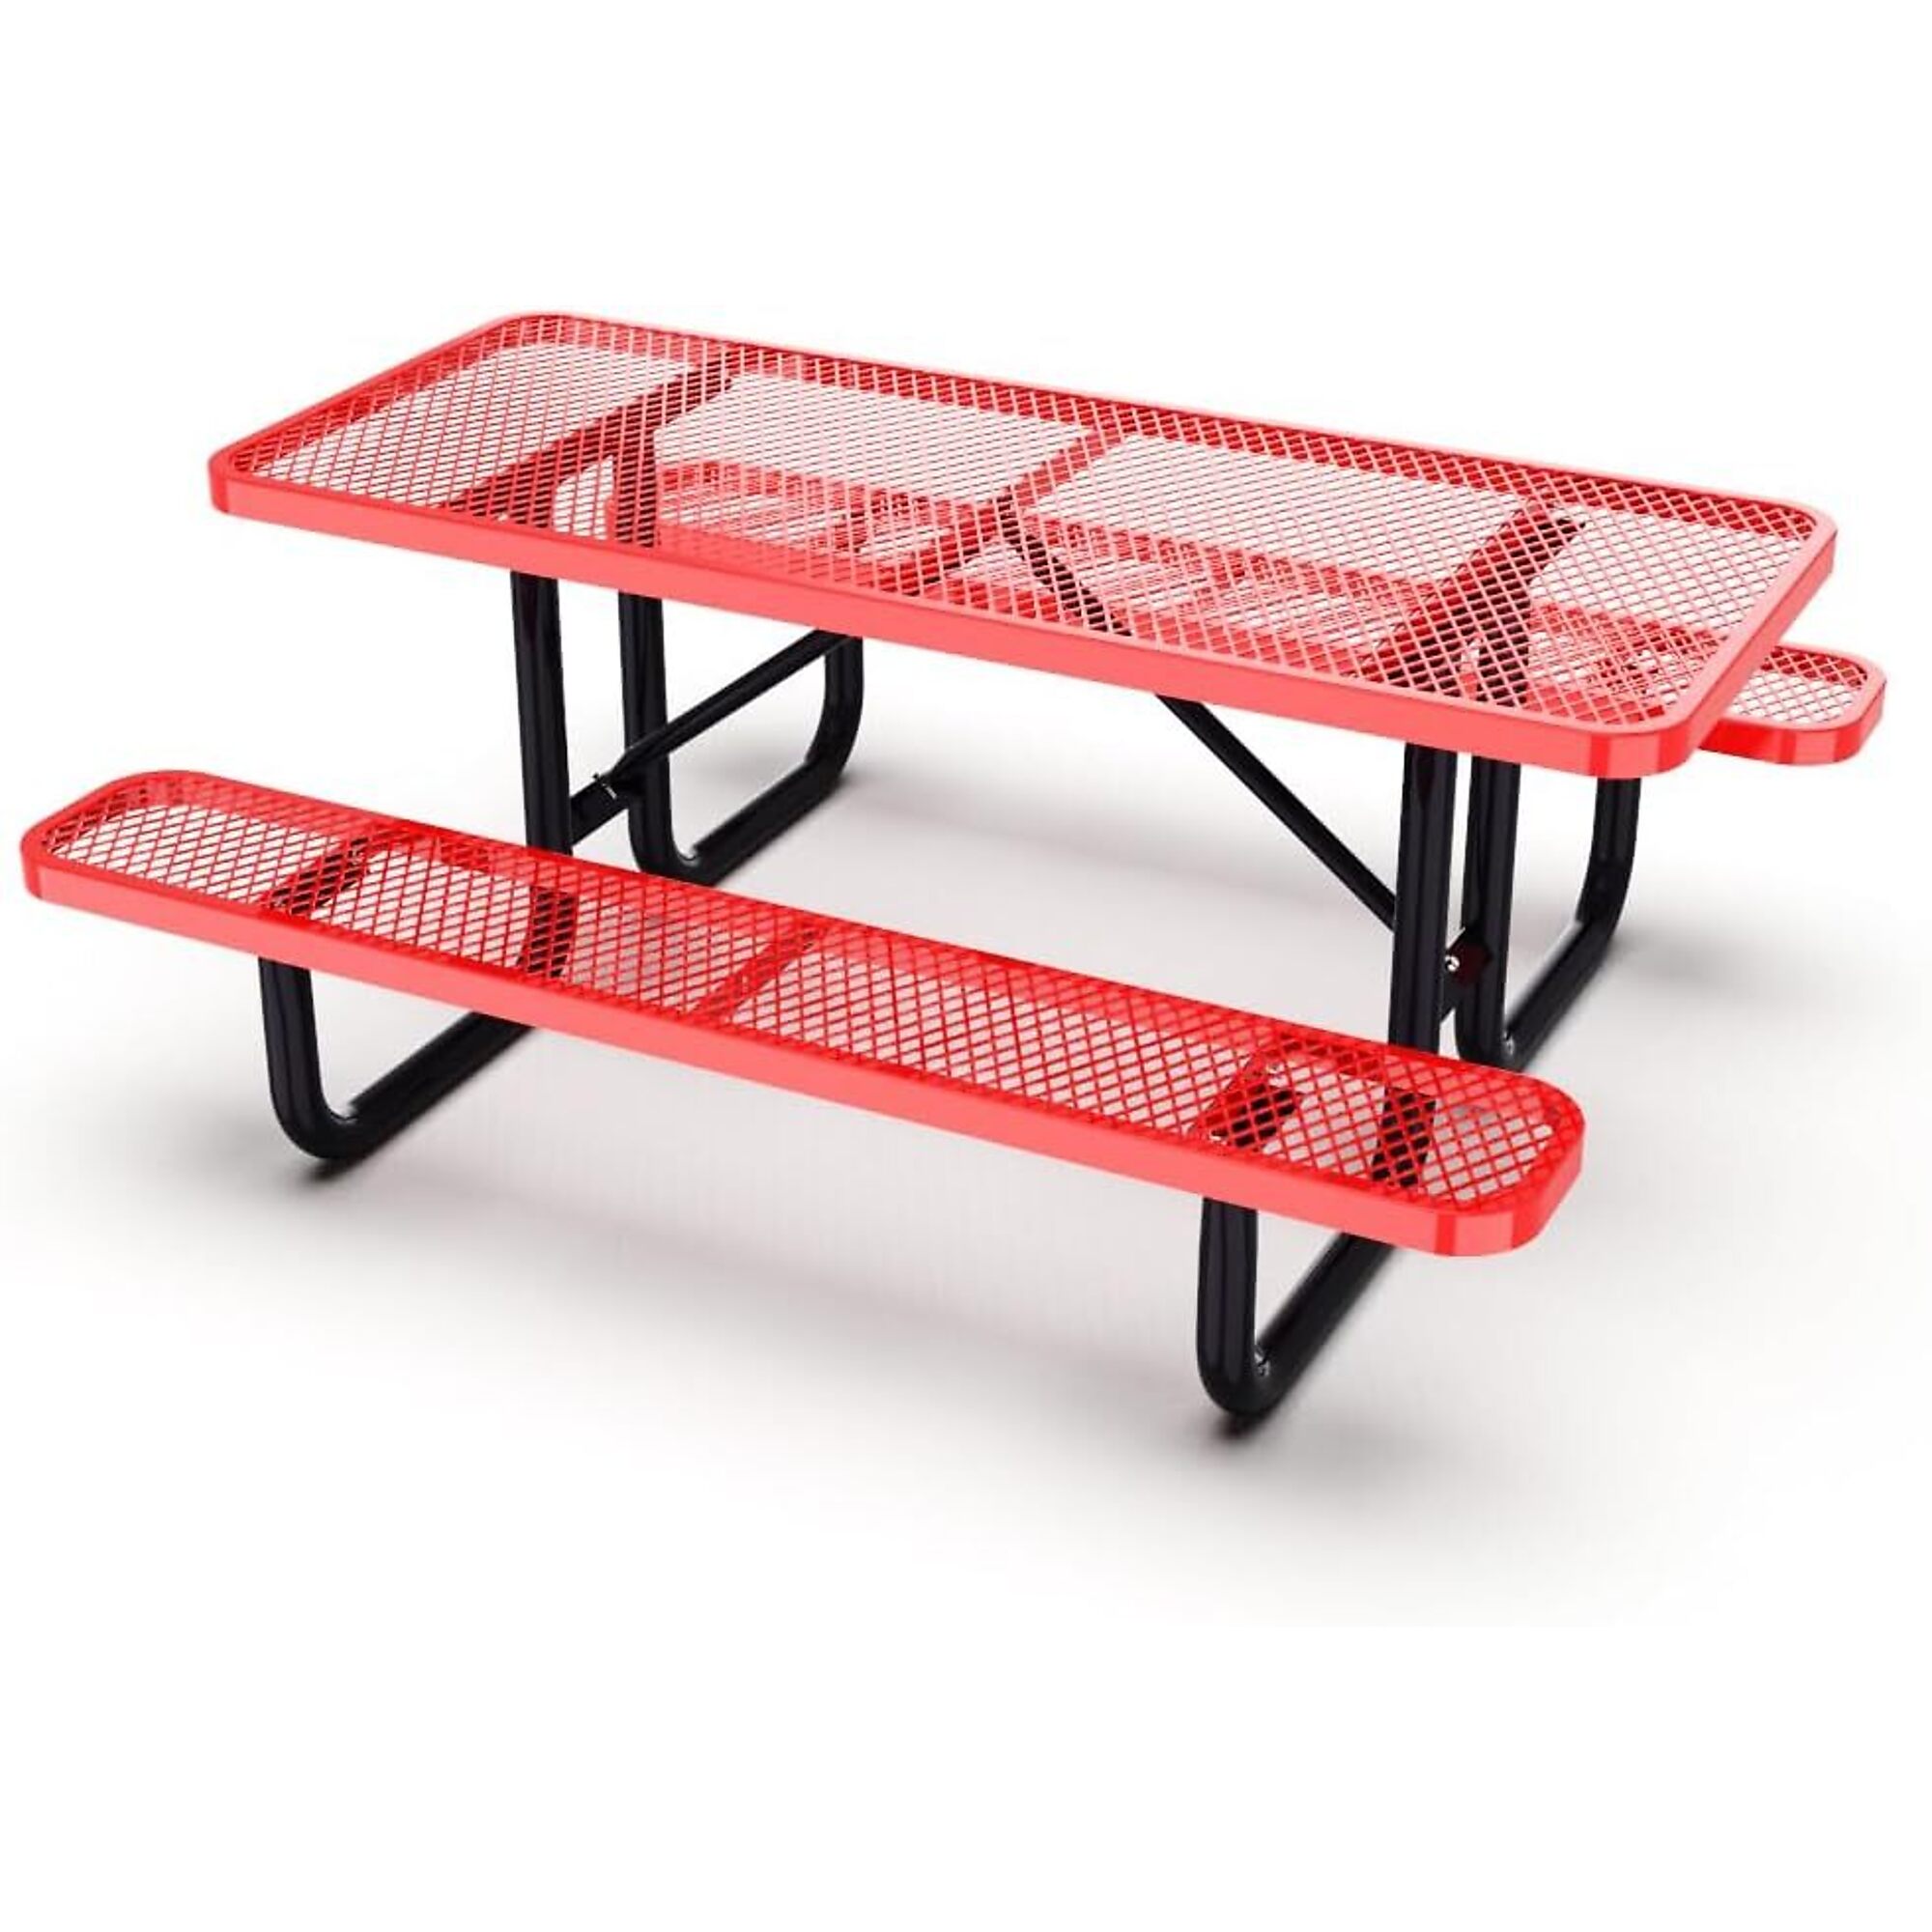 Park Elements, 6ft. thermoplastic coated commercial picnic table, Table Shape Rectangle, Primary Color Red, Height 30 in, Model CD-72PT-RED